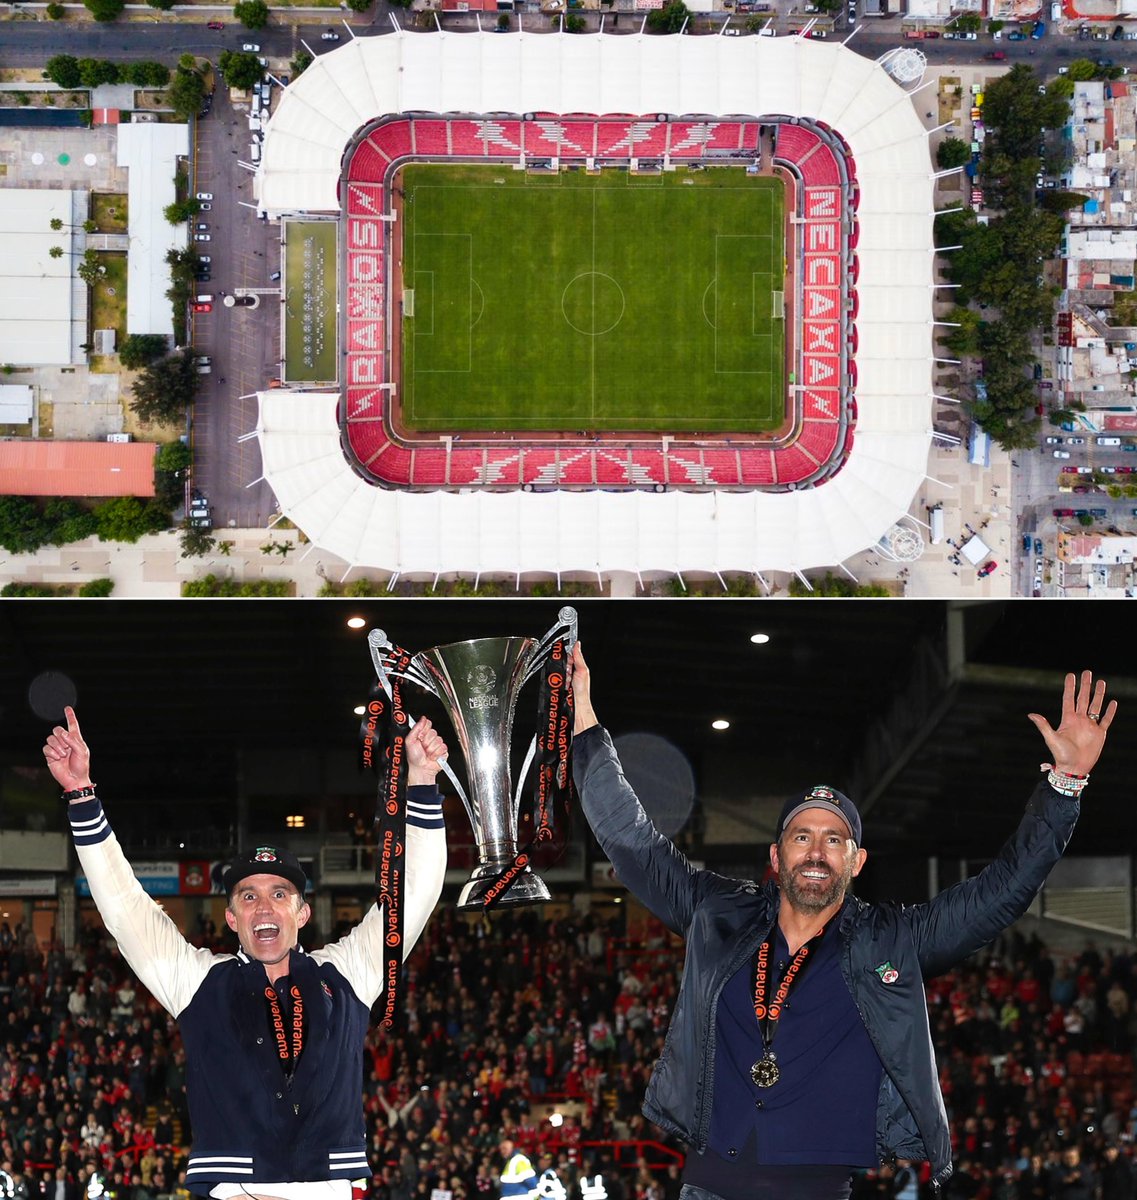 Wrexham owners Ryan Reynolds & Rob McElhenney have purchased a minority stake in top-flight Mexican team Necaxa, per Variety. ⚡️

Actress Eva Longoria, Mesut Ozil & pitcher Justin Verlander  are already among Necaxa's owners. Can Ryan & Rob bring the magic touch to Liga MX? 🐉